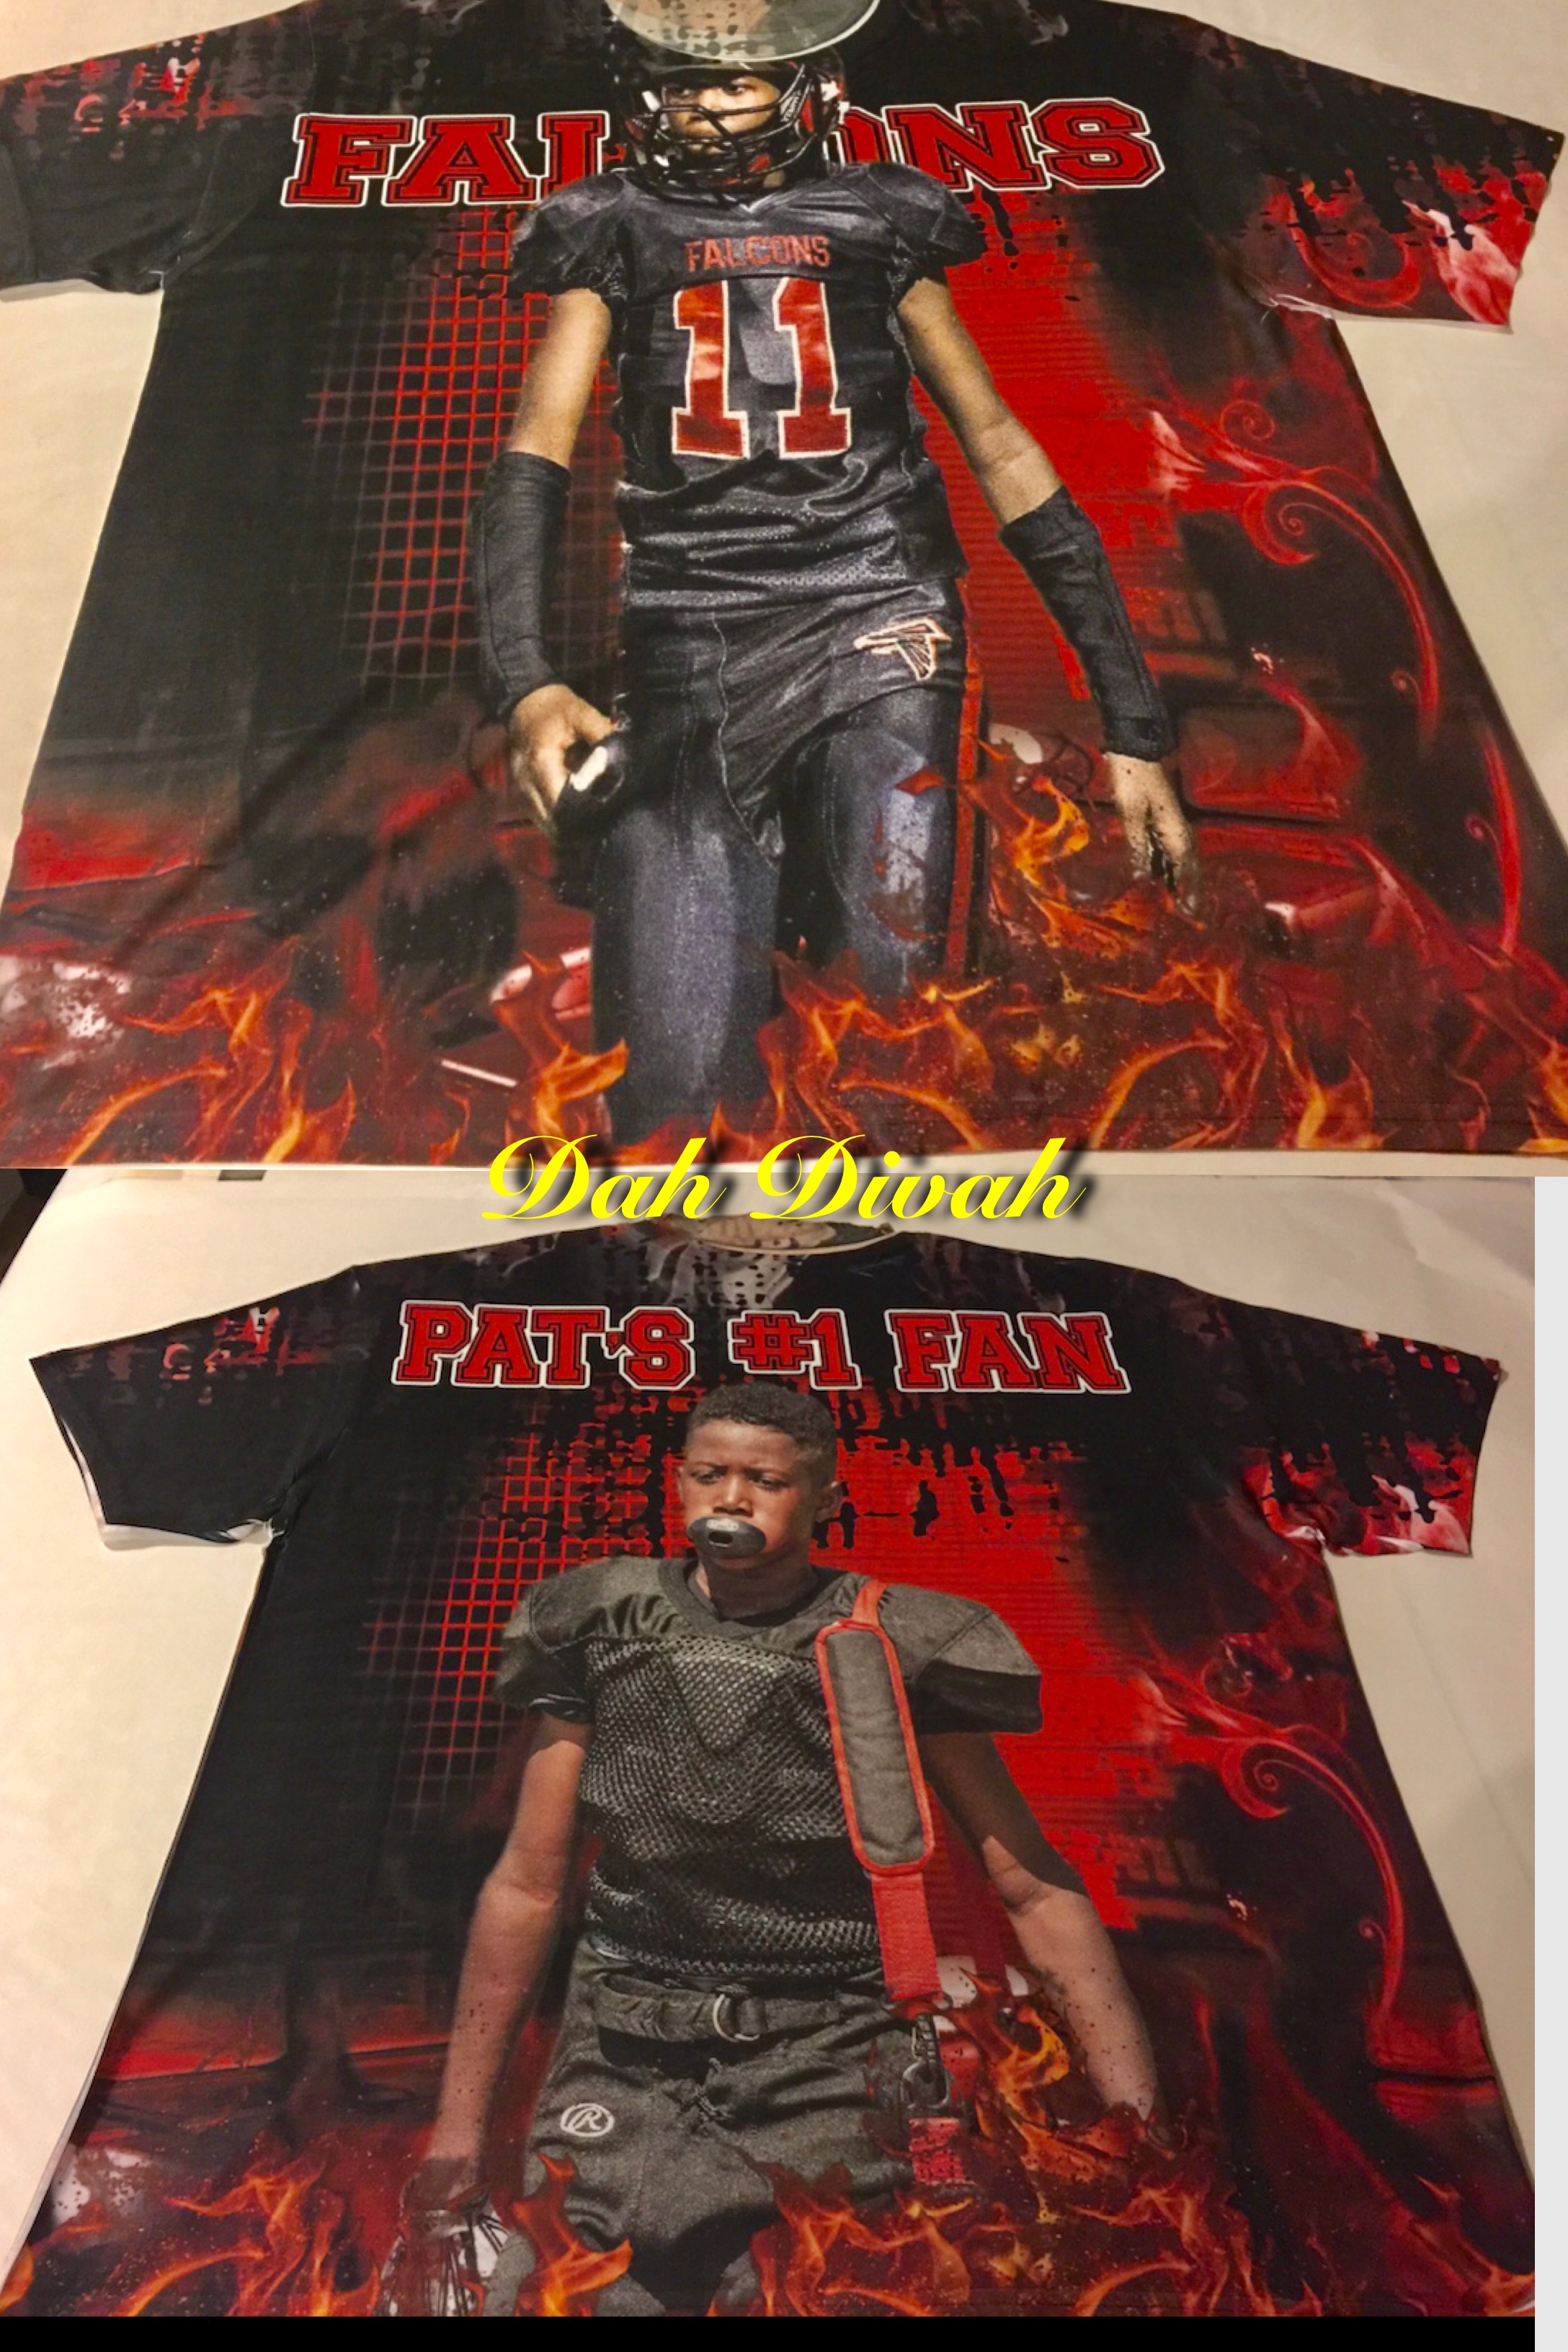 Flaming Hot made with sublimation printing